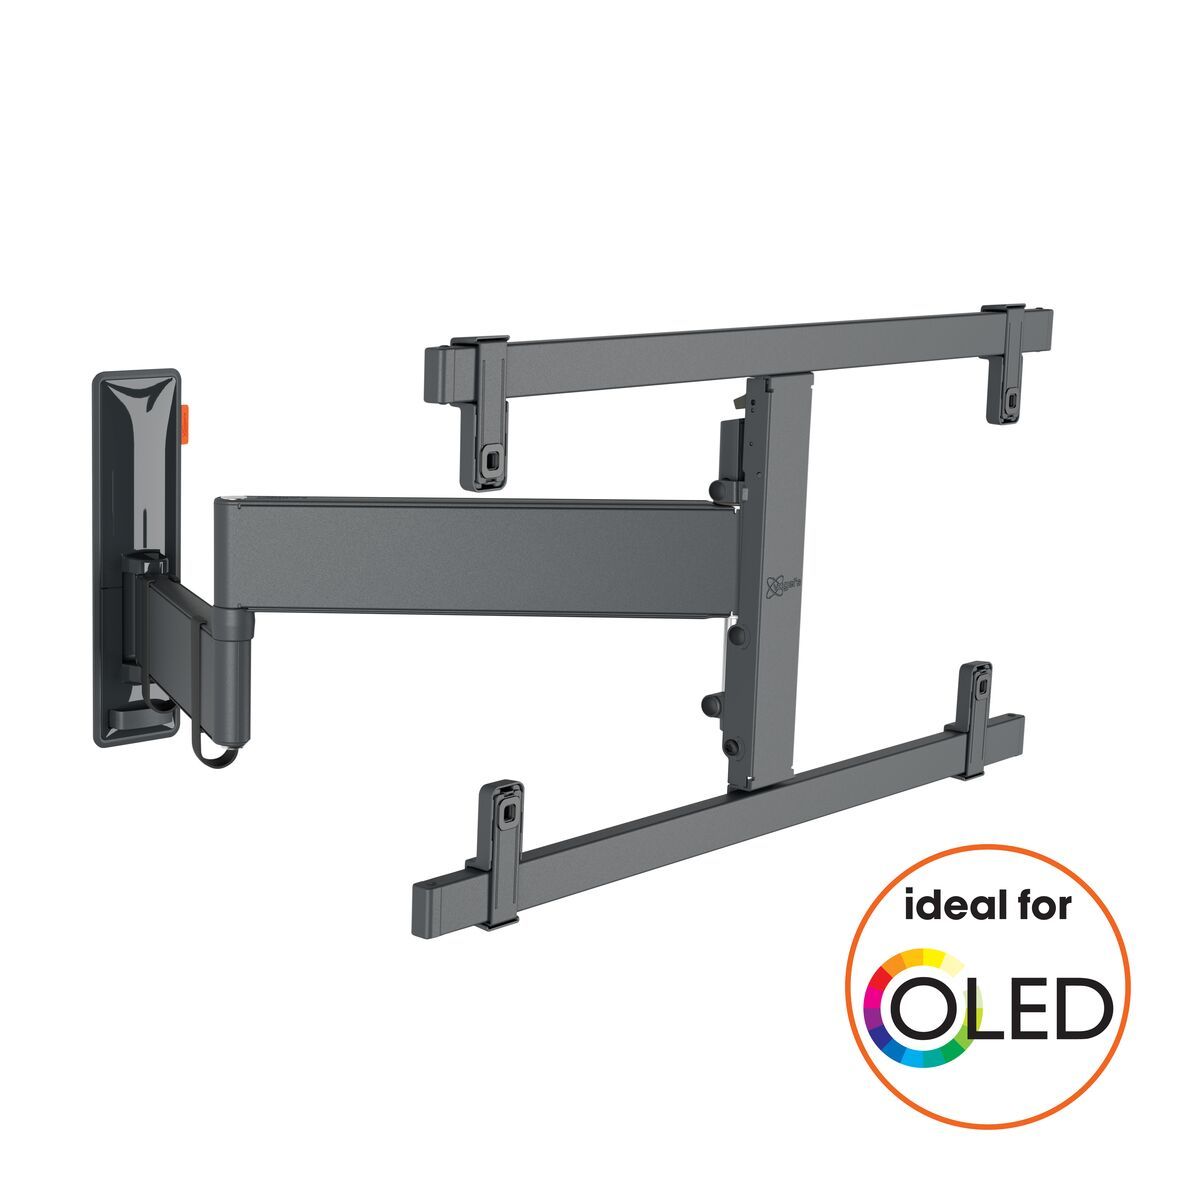 Vogel's TVM 3665 Full-Motion TV Wall Mount - Suitable for 40 up to 77 inch TVs - Full motion (up to 180°) swivel - Tilt up to 20° - Promo